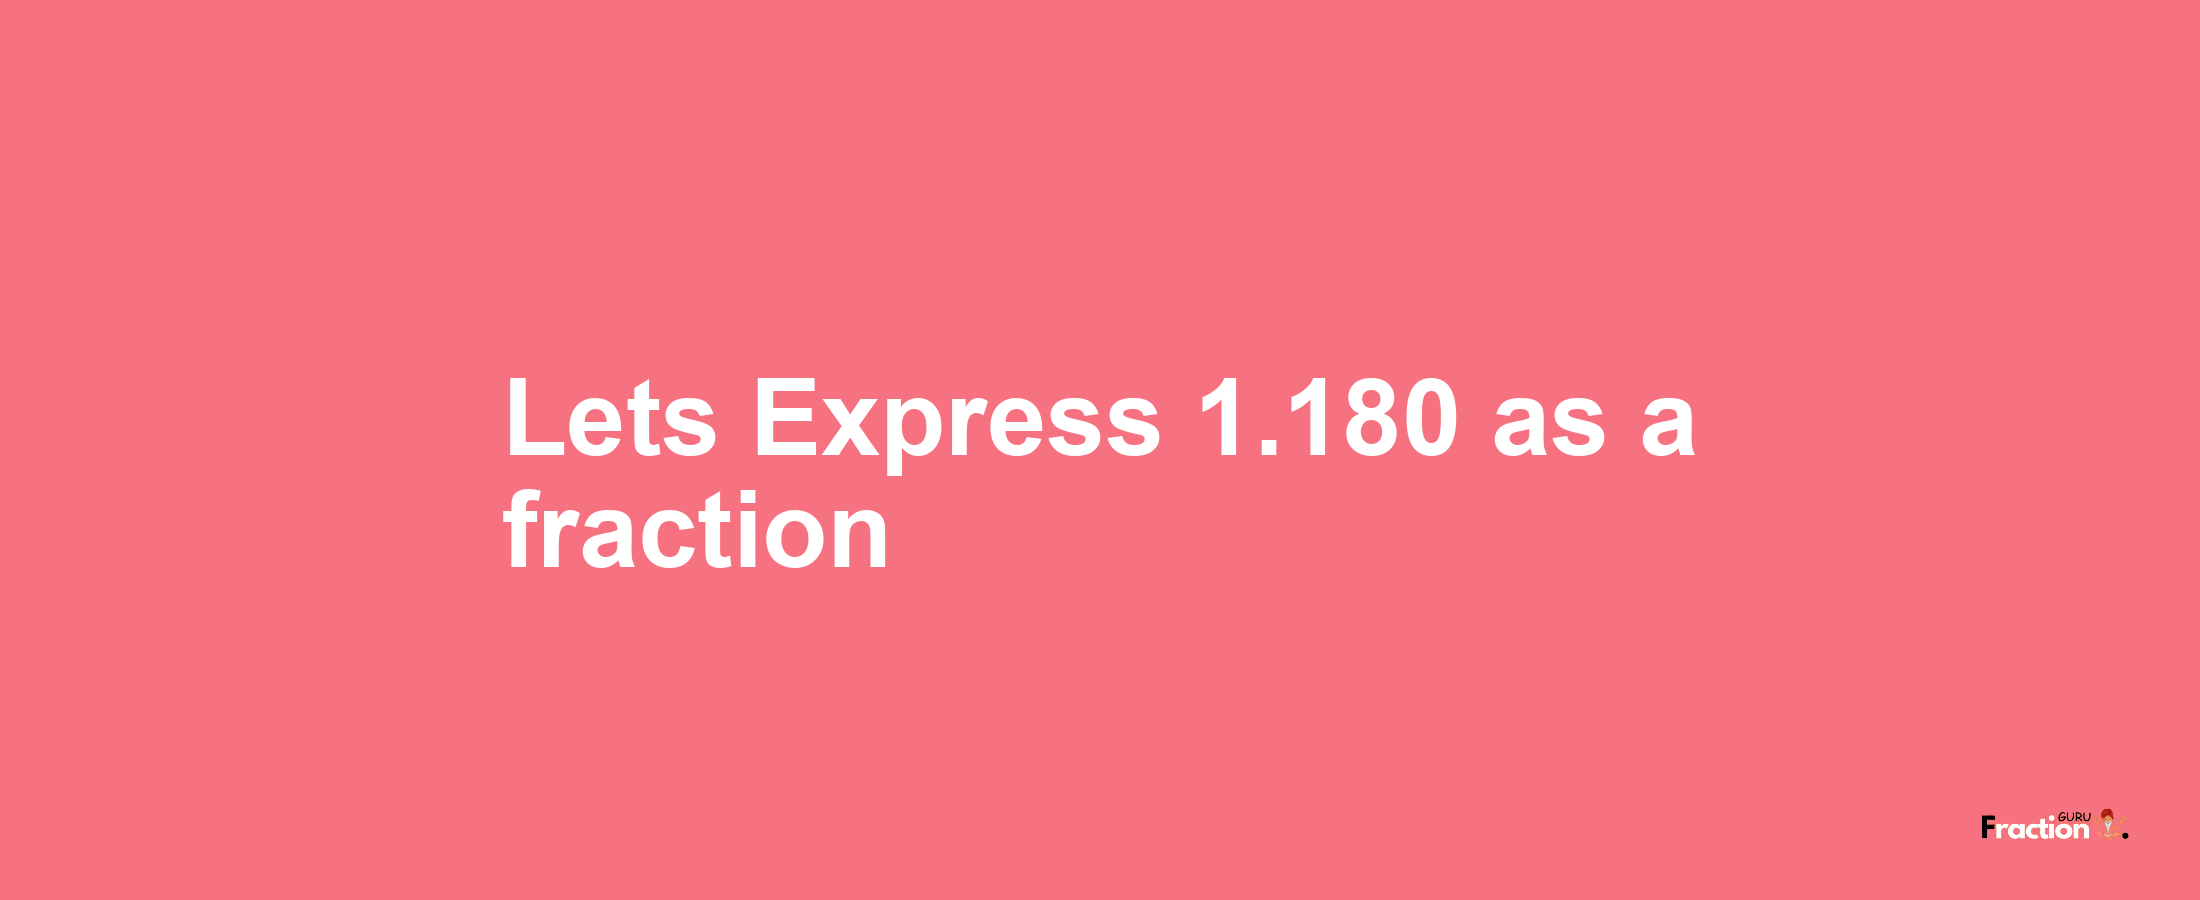 Lets Express 1.180 as afraction